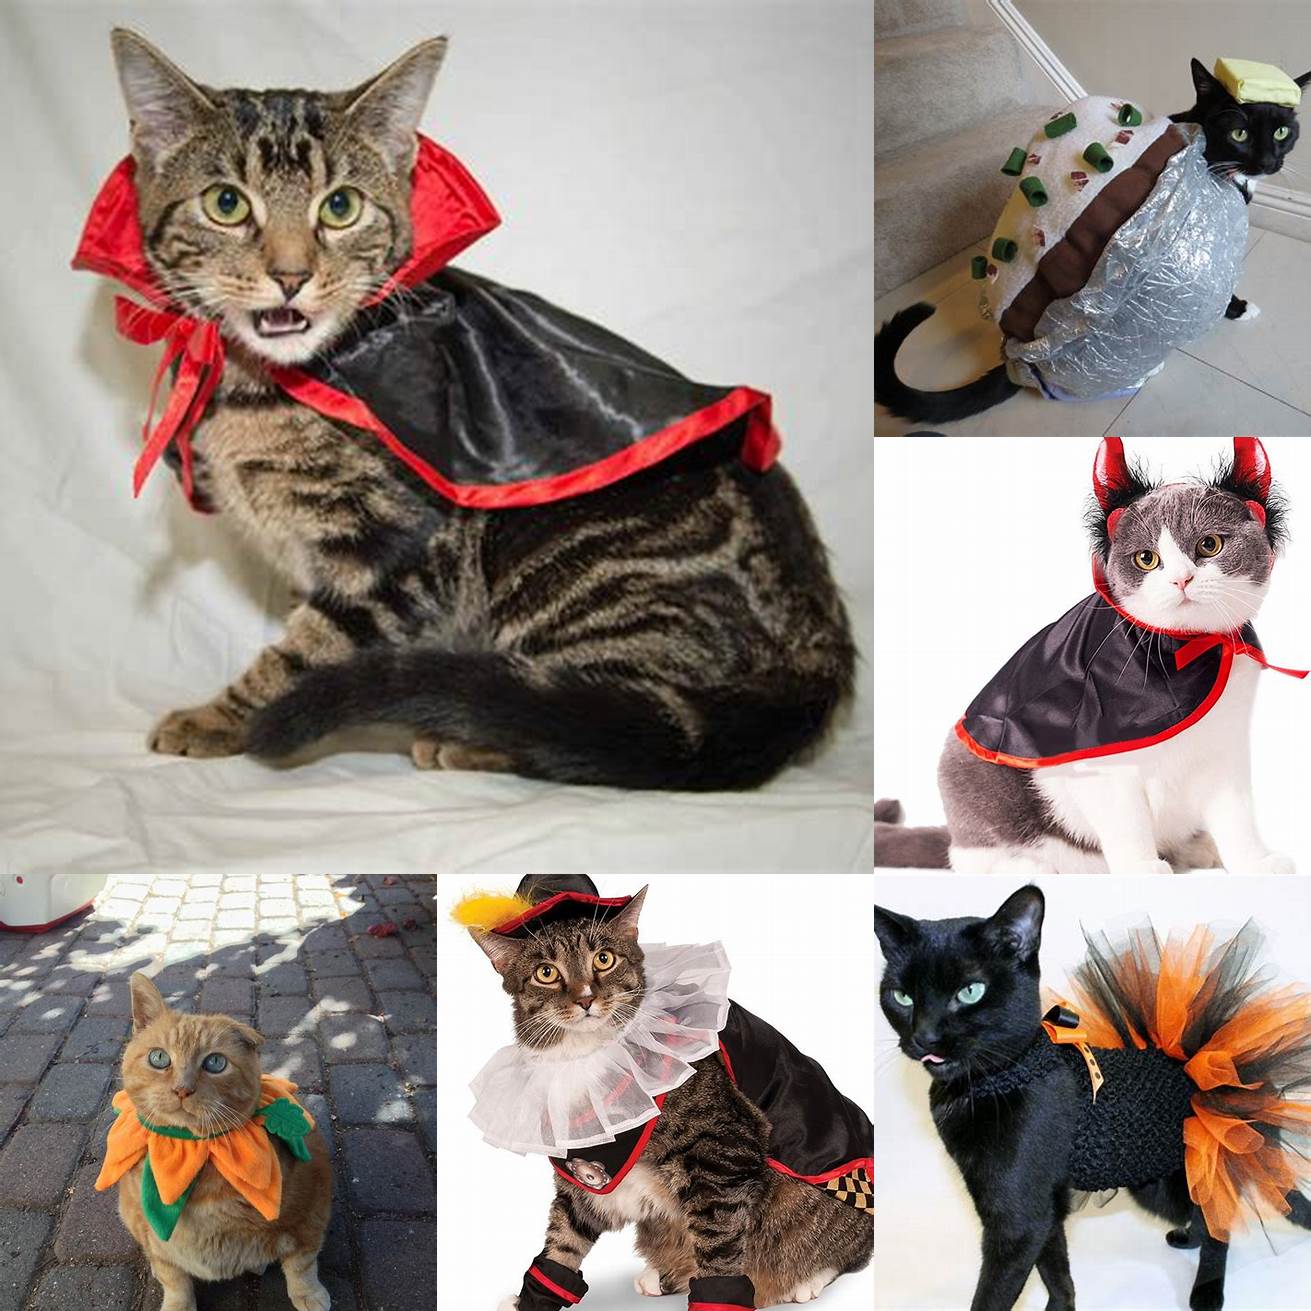 Q Can I make a cat costume for my pet